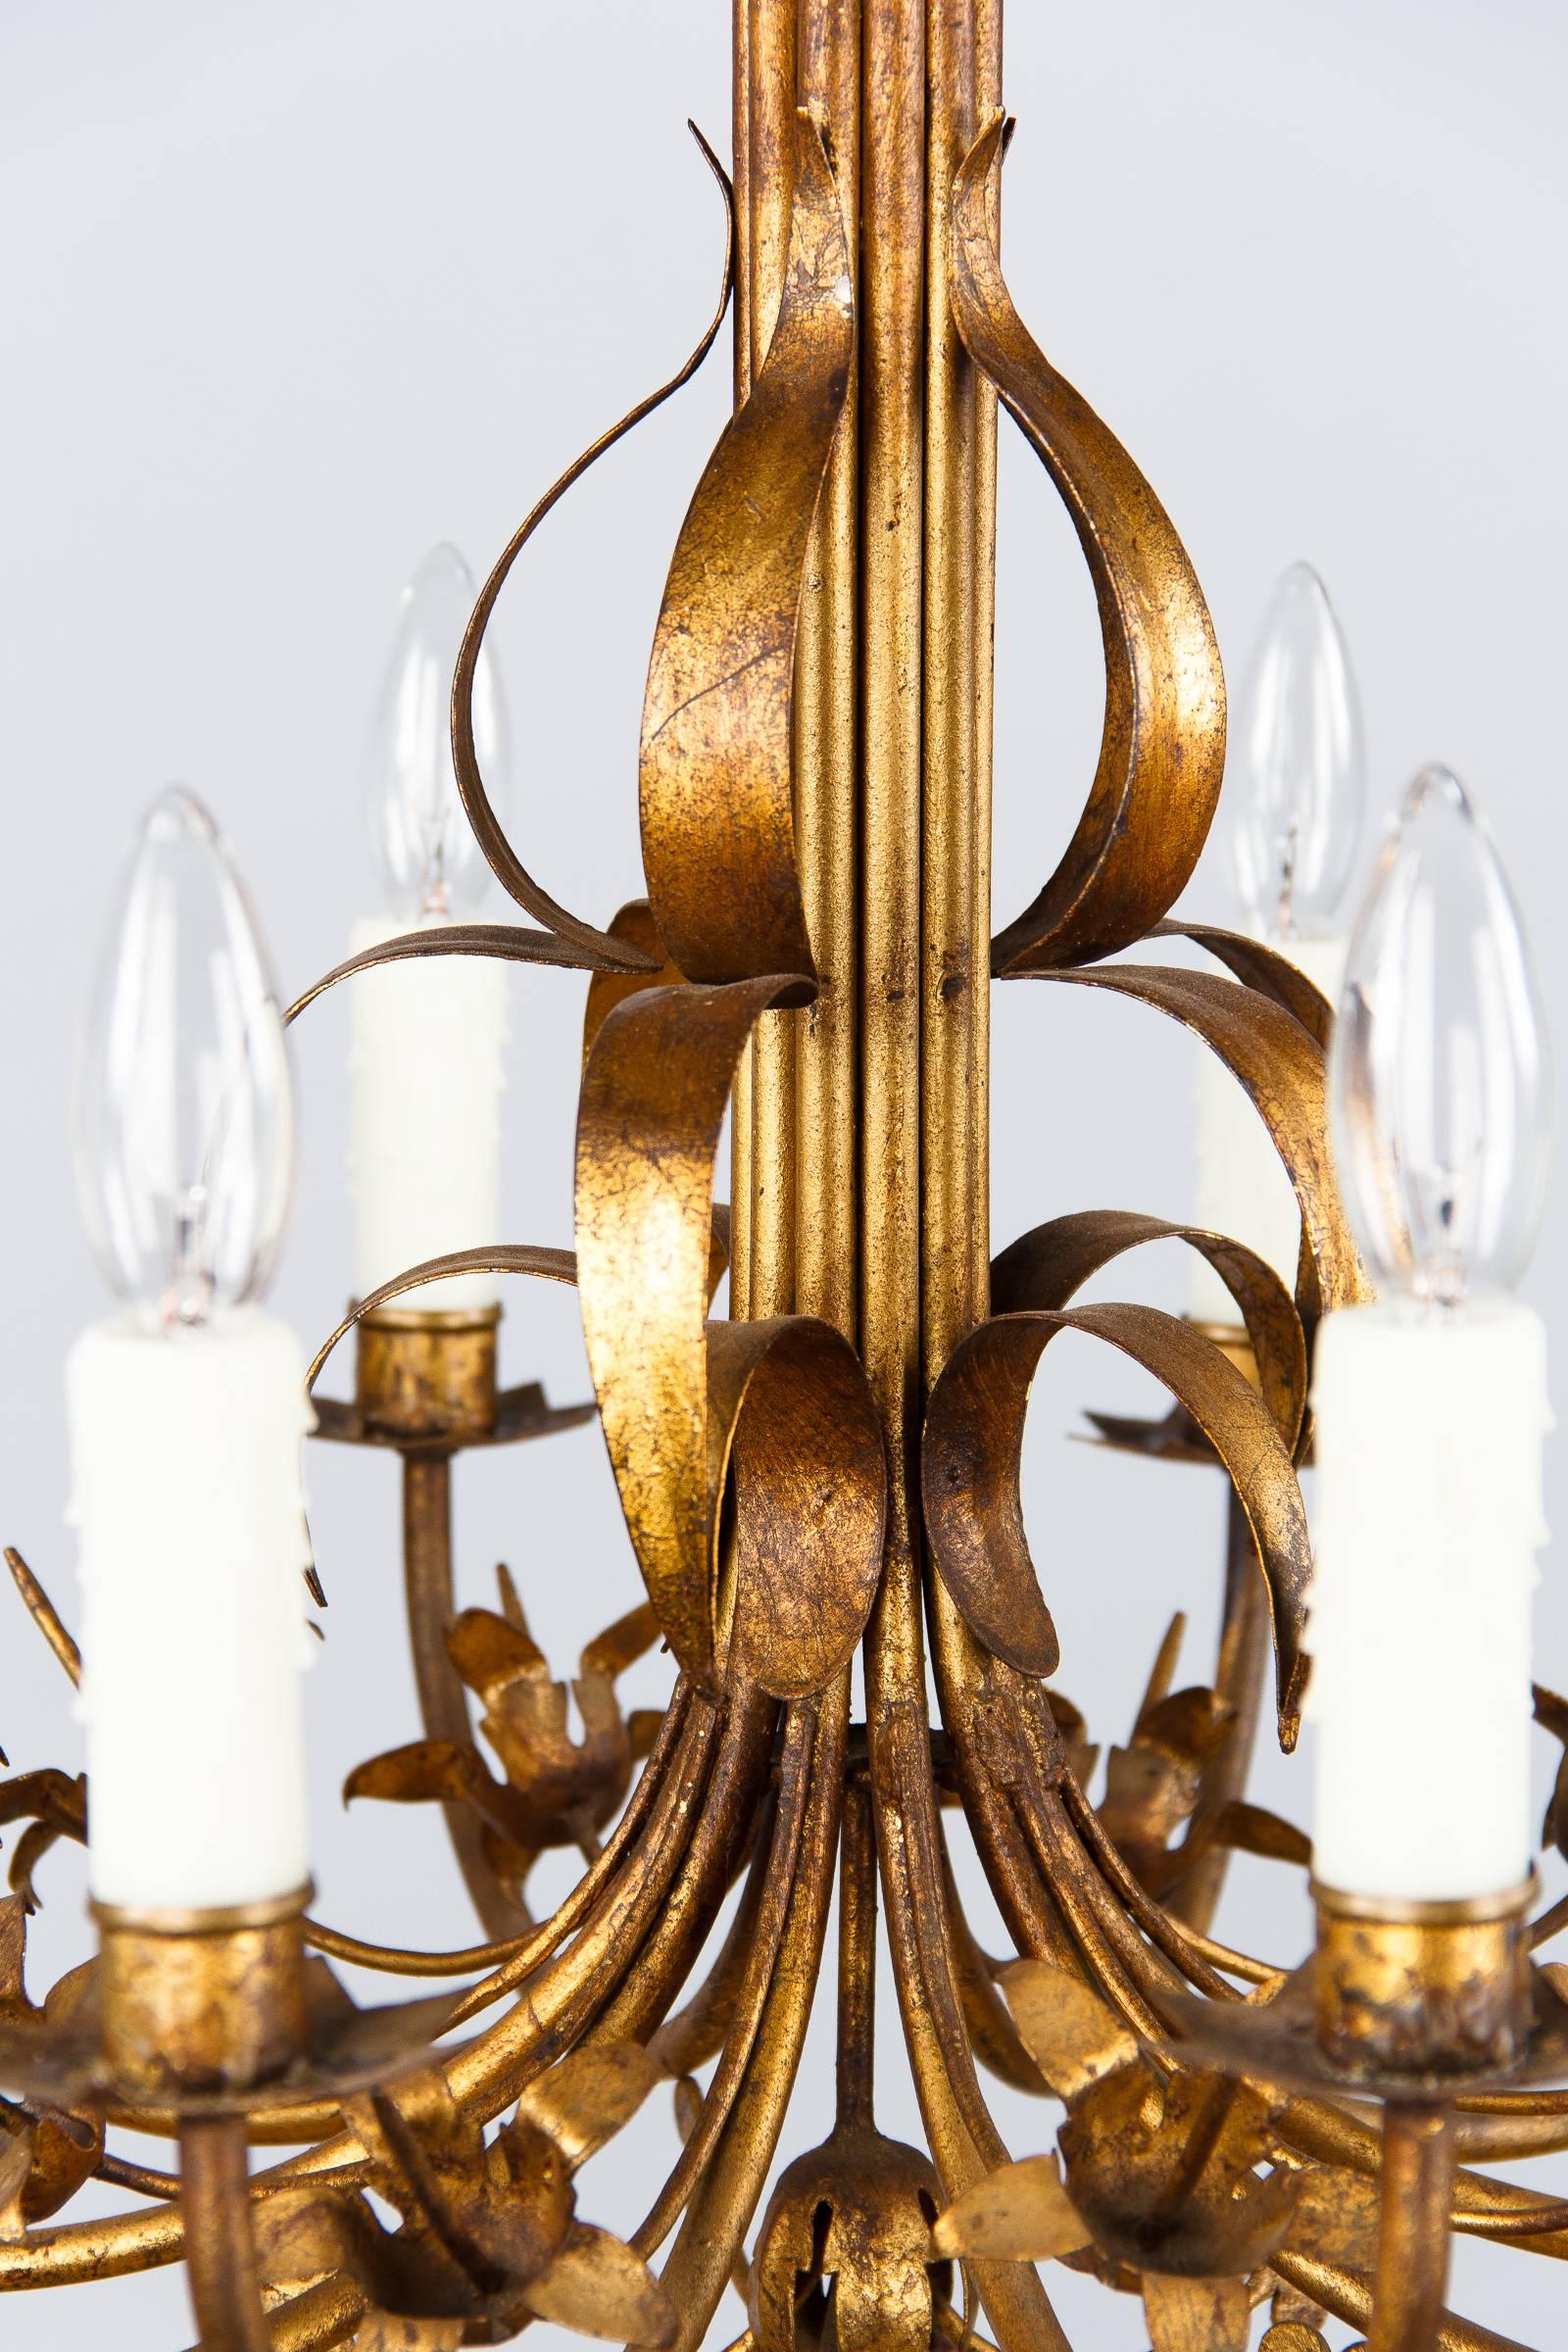 Mid-20th Century French Gilded Metal Chandelier, circa 1940s